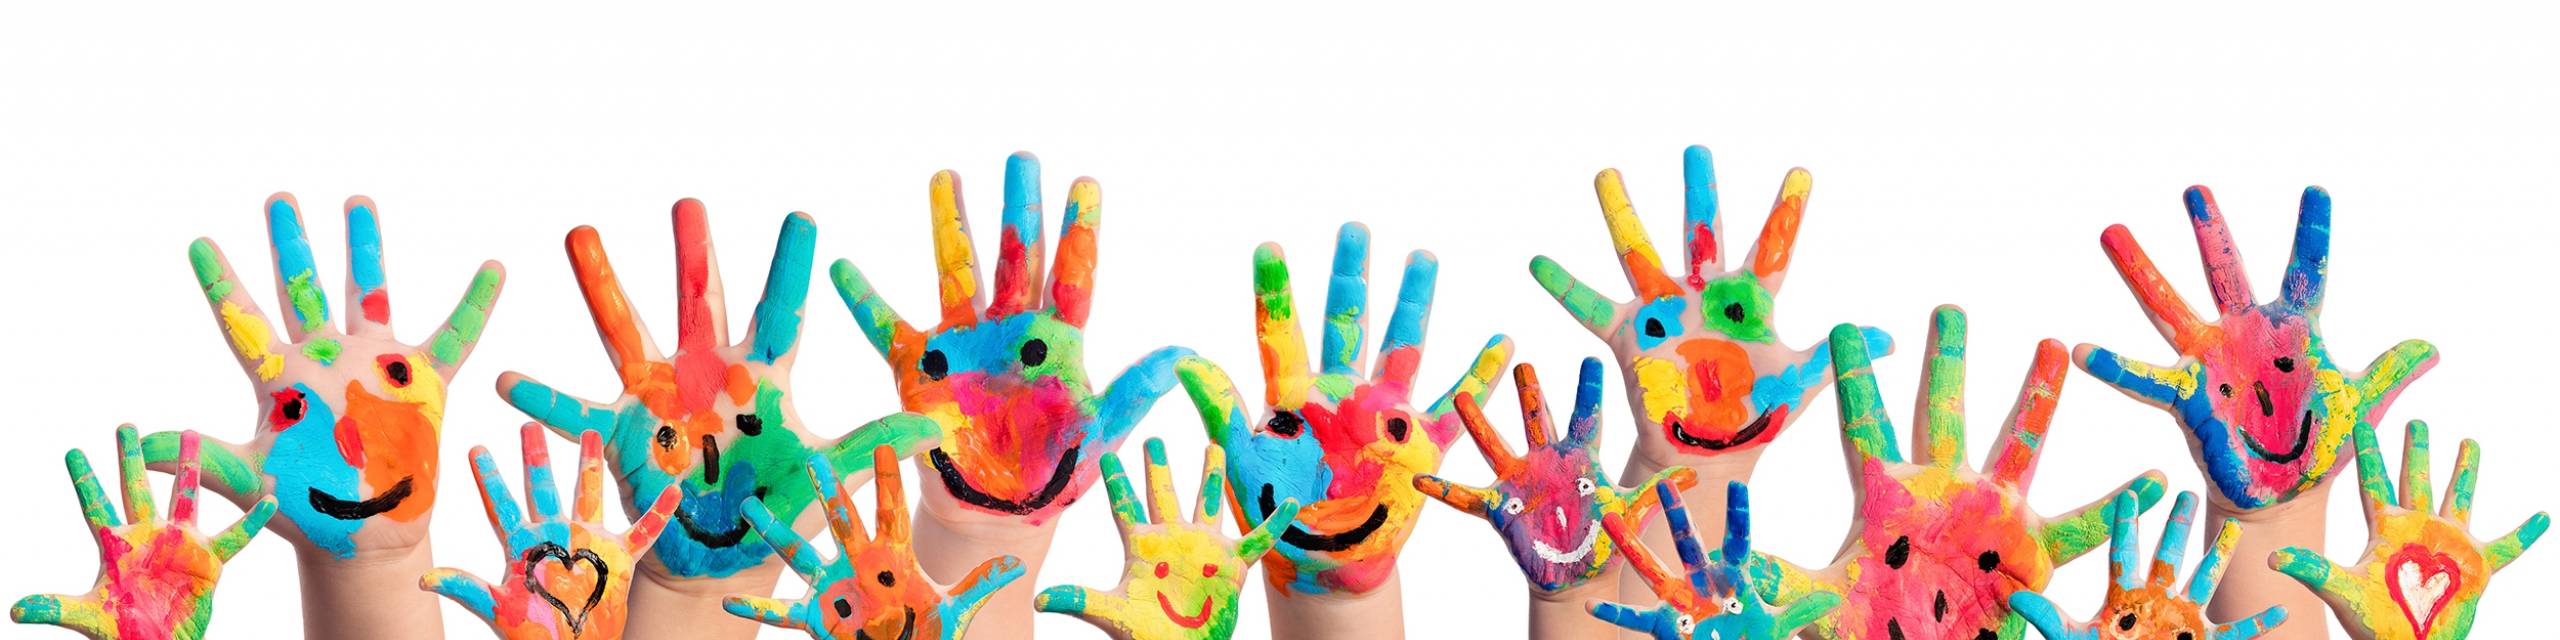 Hands with colorful smiles painted on them